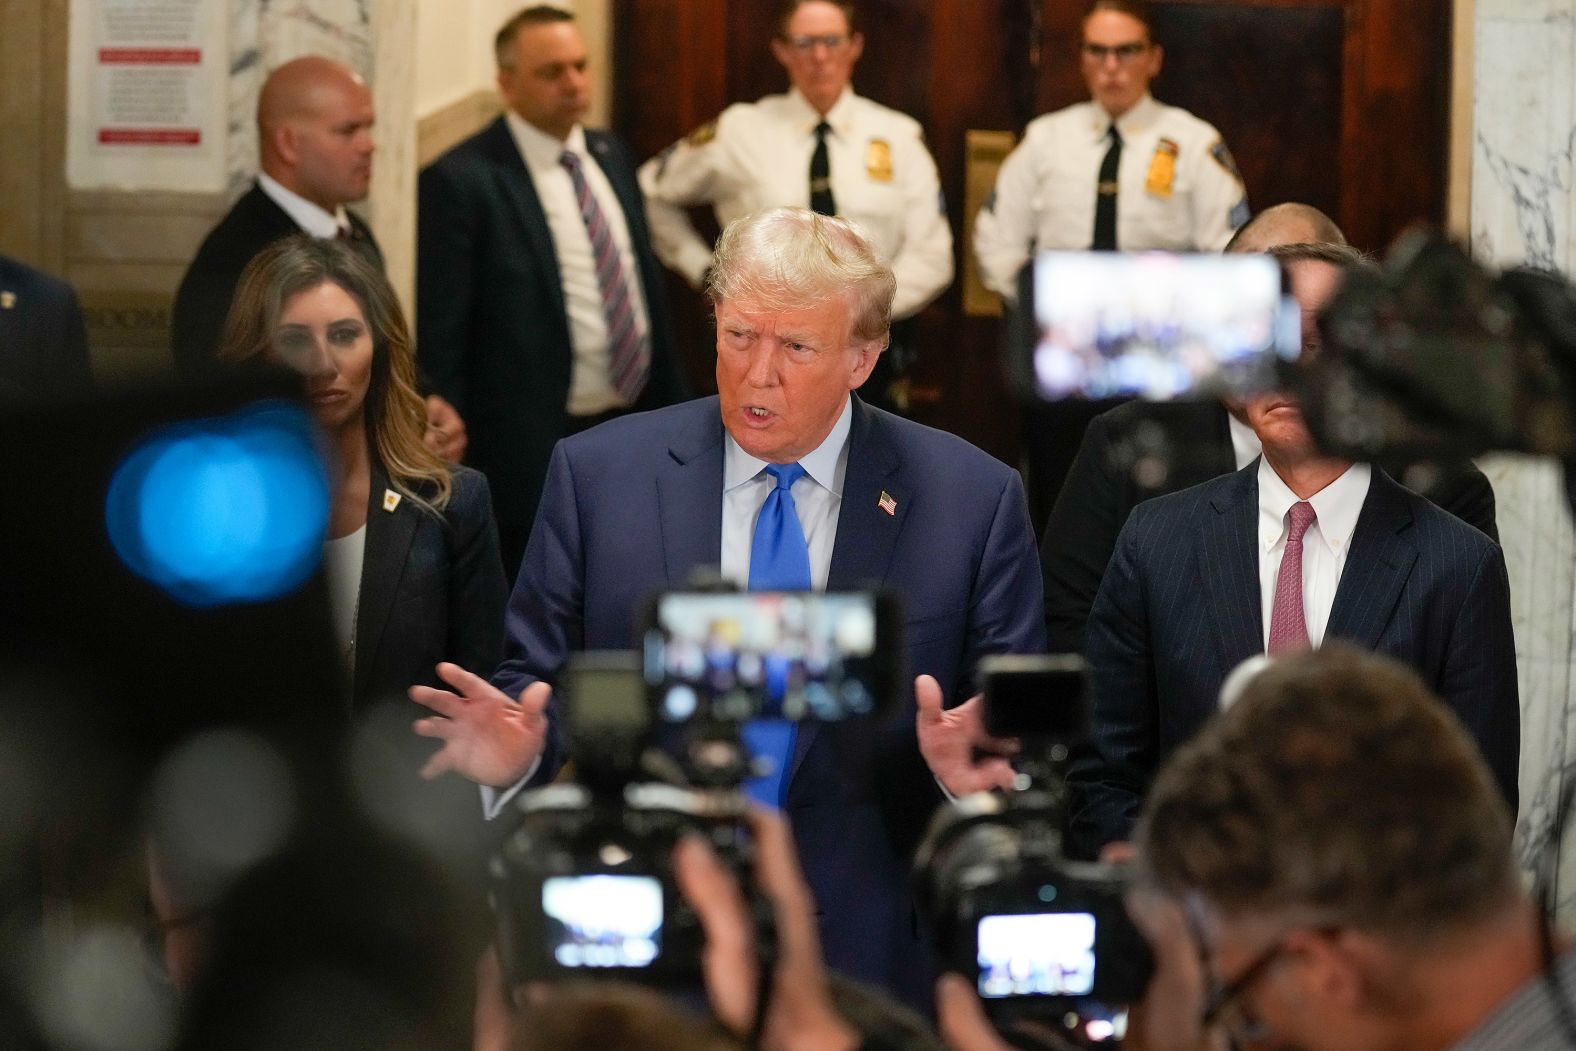 Trump speaks to the media at the New York Supreme Court on October 2. <a href="index.php?page=&url=https%3A%2F%2Fwww.cnn.com%2Fpolitics%2Flive-news%2Ftrump-fraud-trial-new-york-10-02-23%2Fh_e83e2797310240ba7e8540e4c80ba014" target="_blank">On his way to the courtroom</a>, Trump said the civil fraud trial is a "continuation of the single greatest witch hunt of all time." He also called it "a scam and a sham."